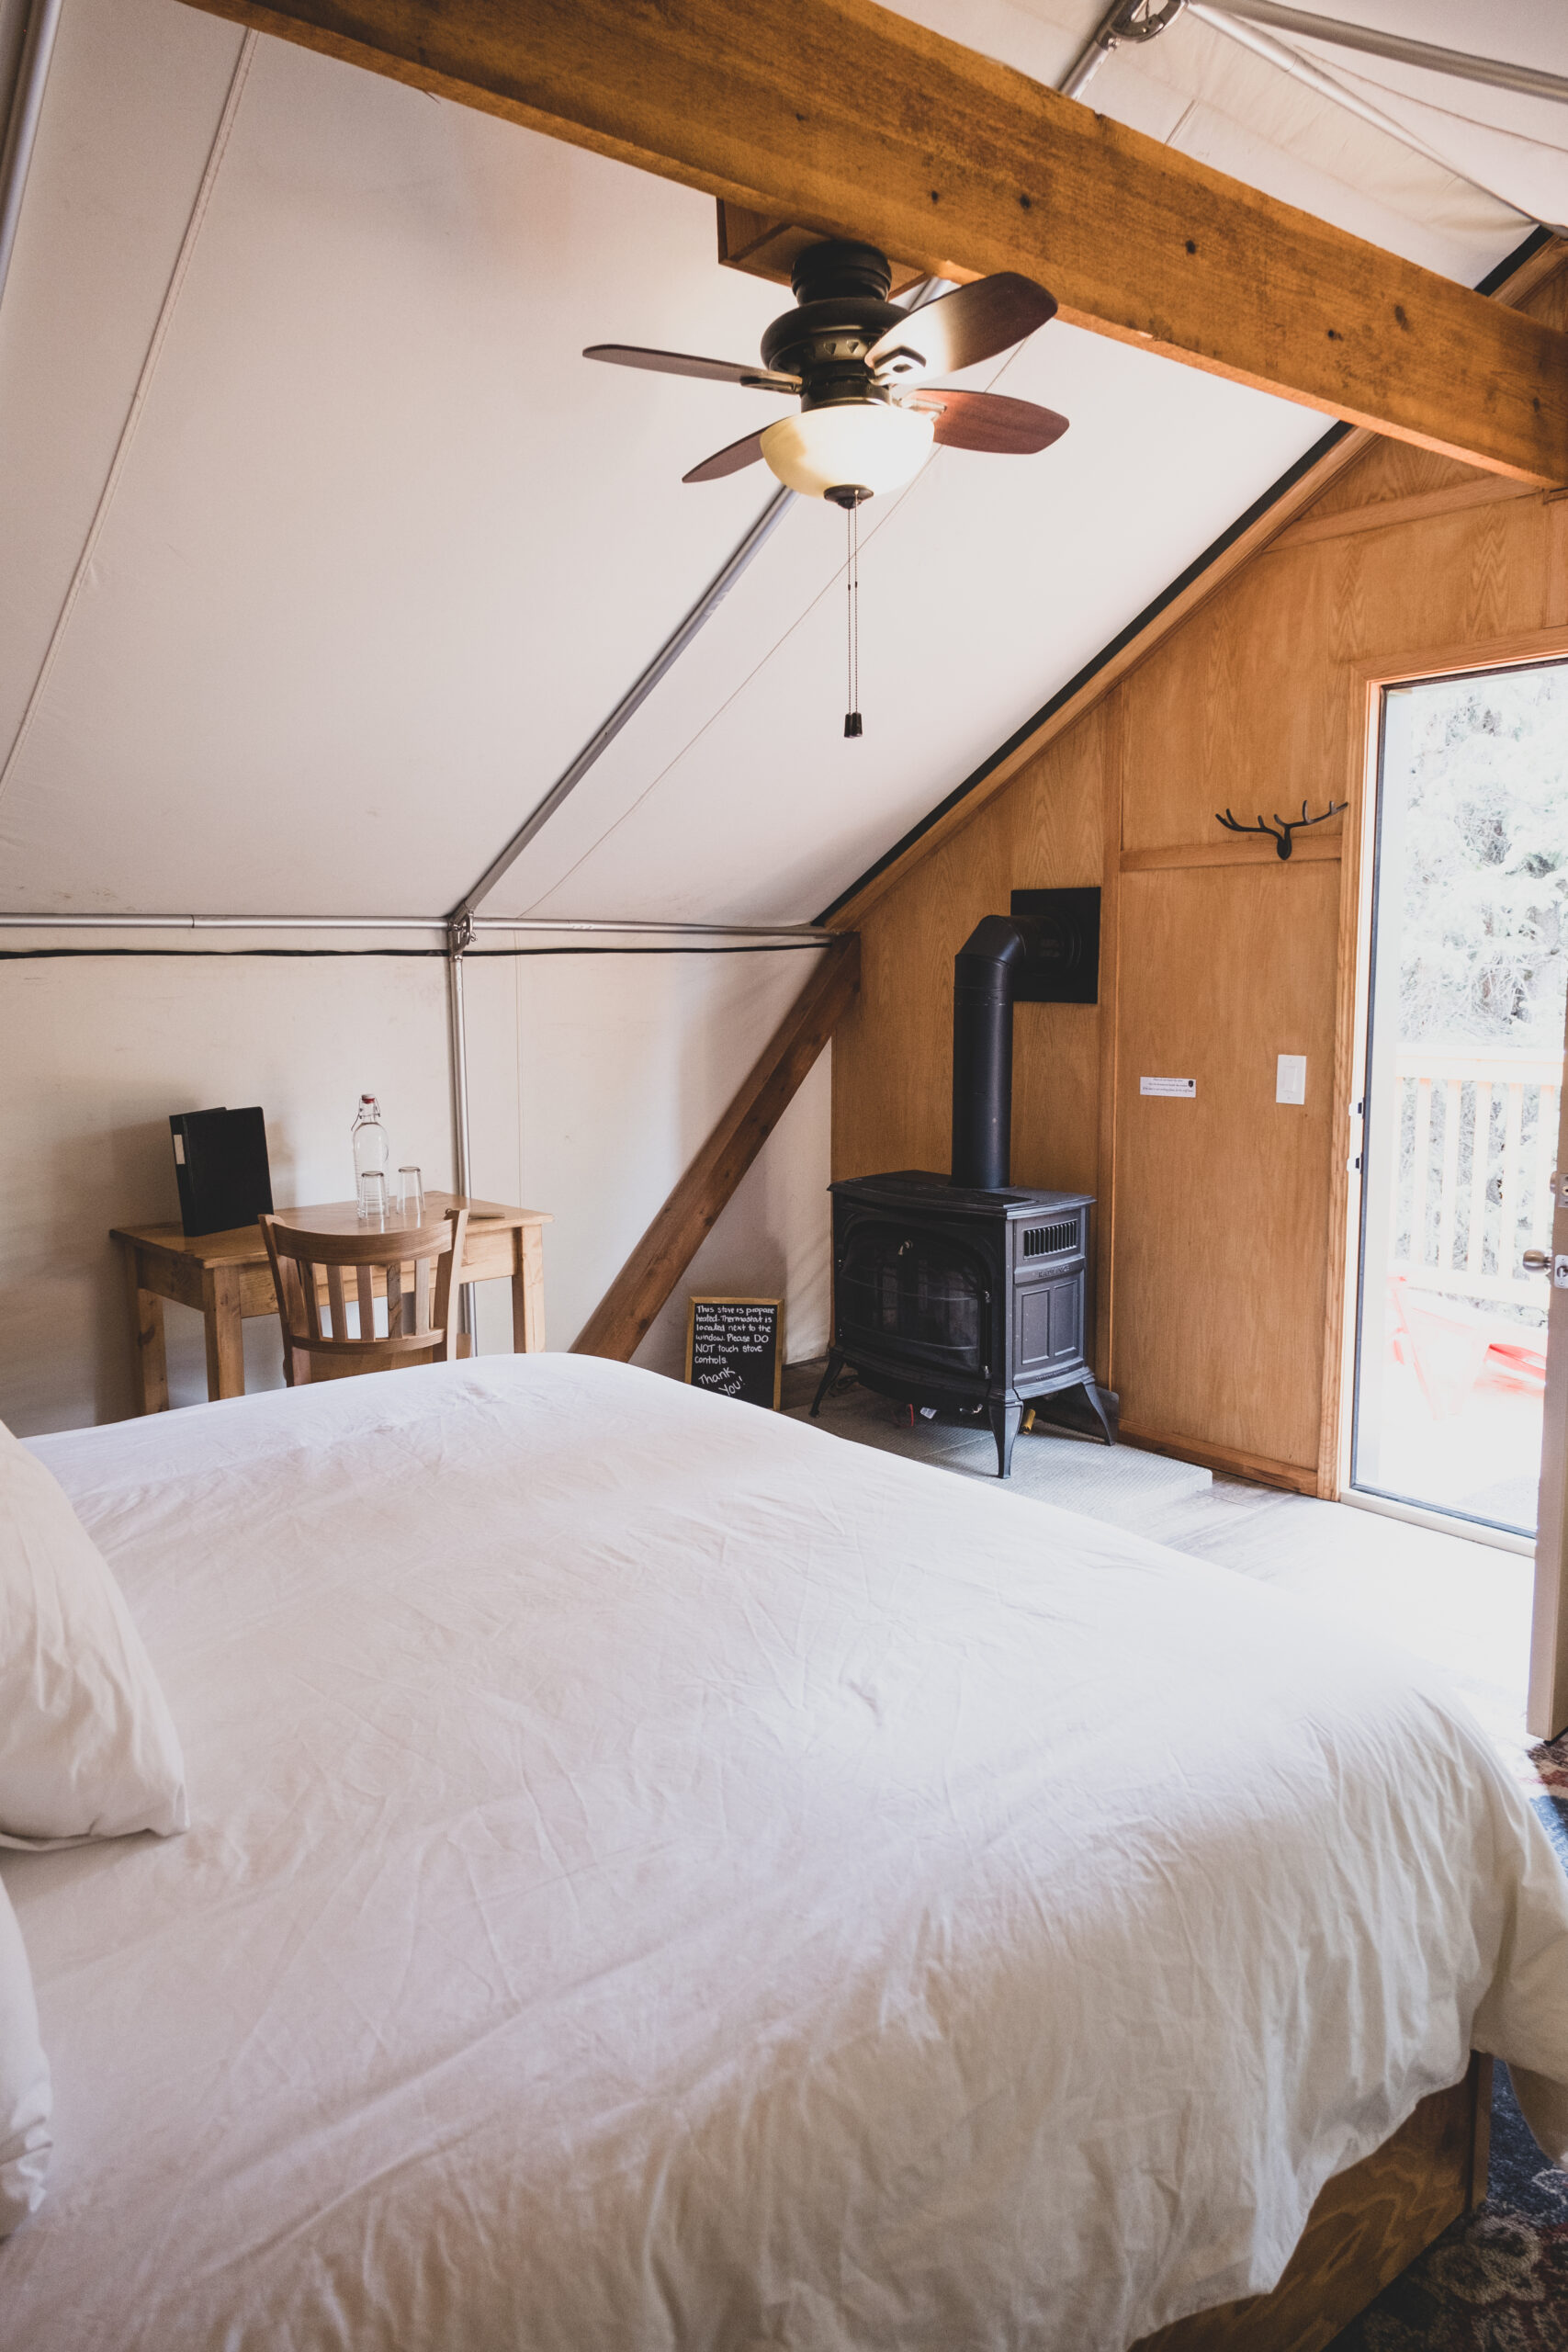 Inside the Glamping Tents